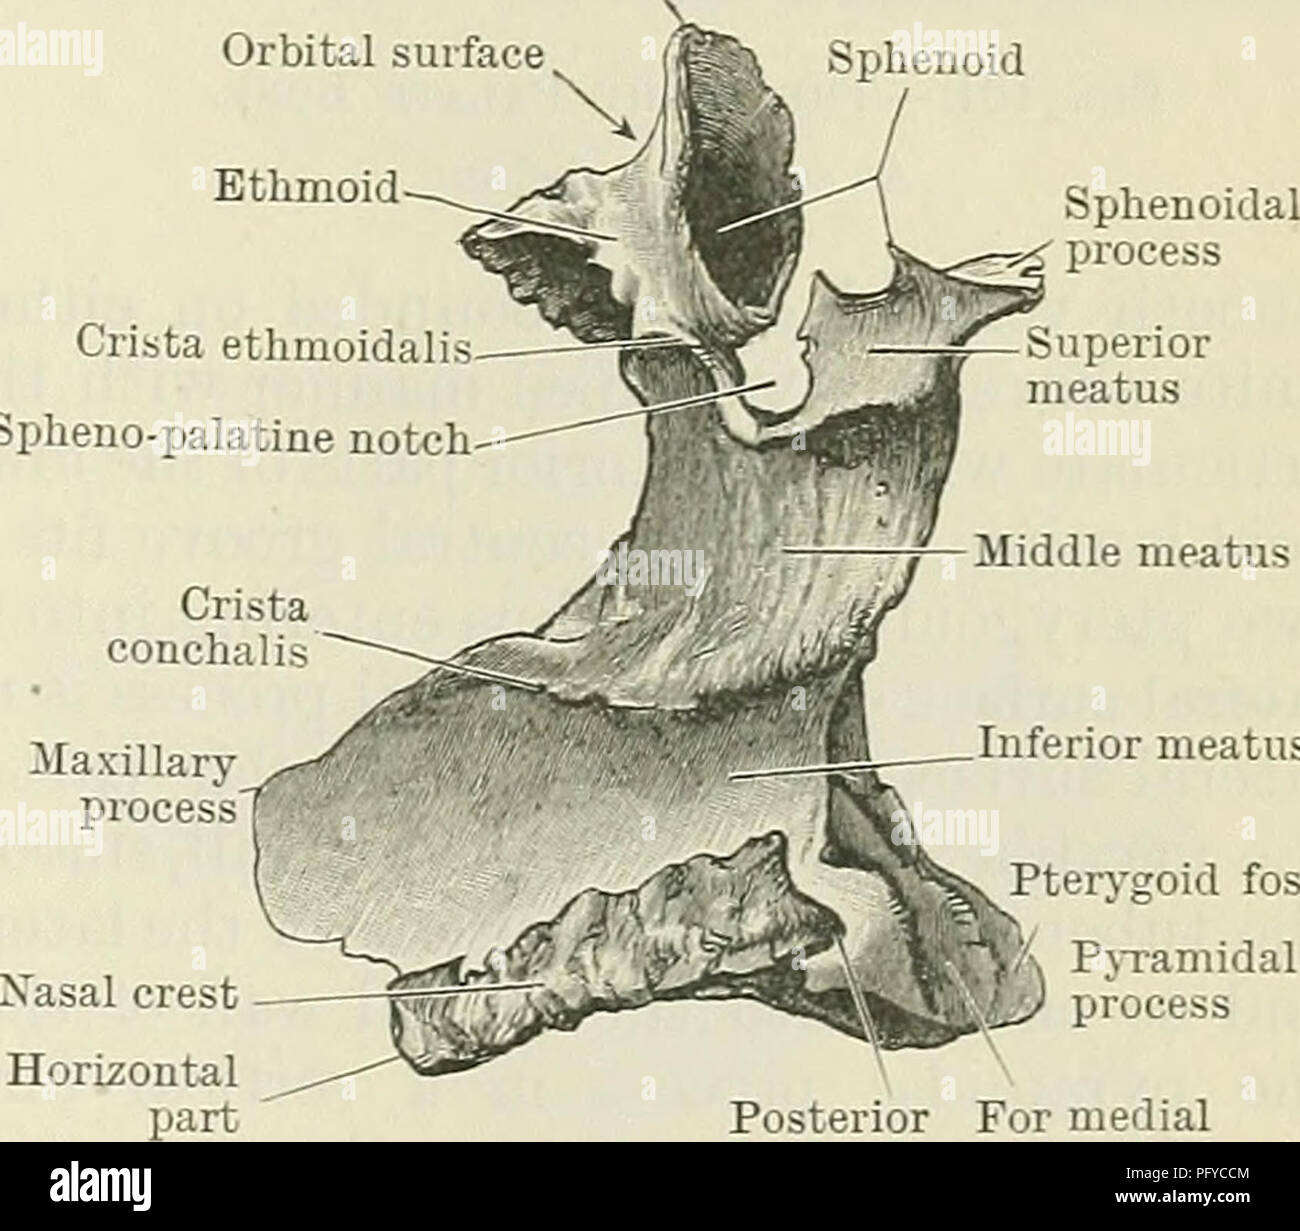 . Cunningham's Text-book of anatomy. Anatomy. Pterygo- palatine fossa Sphenoidal process ^g^; Spheno-palatine notch For medial pteiygoid lamina Pterygoid f For lateral pterygoid lamina&quot; Pyramidal - process Surface for attach. Surface Pterygopalatine sulcus of pterygoideus for maxilla internus Orbital process Orbital surface Ethmoid Sphenoid Crista ethmoidalis Spheno-palatine notch. Inferior meatus Pterygoid fossa, Pyramidal P^ process Posterior For medial nasal spine pterygoid lamina A Fig. 160.—Eight Palate Bone. A, As seen from the Lateral Side ; B, As viewed from the Medial Side. The p Stock Photo